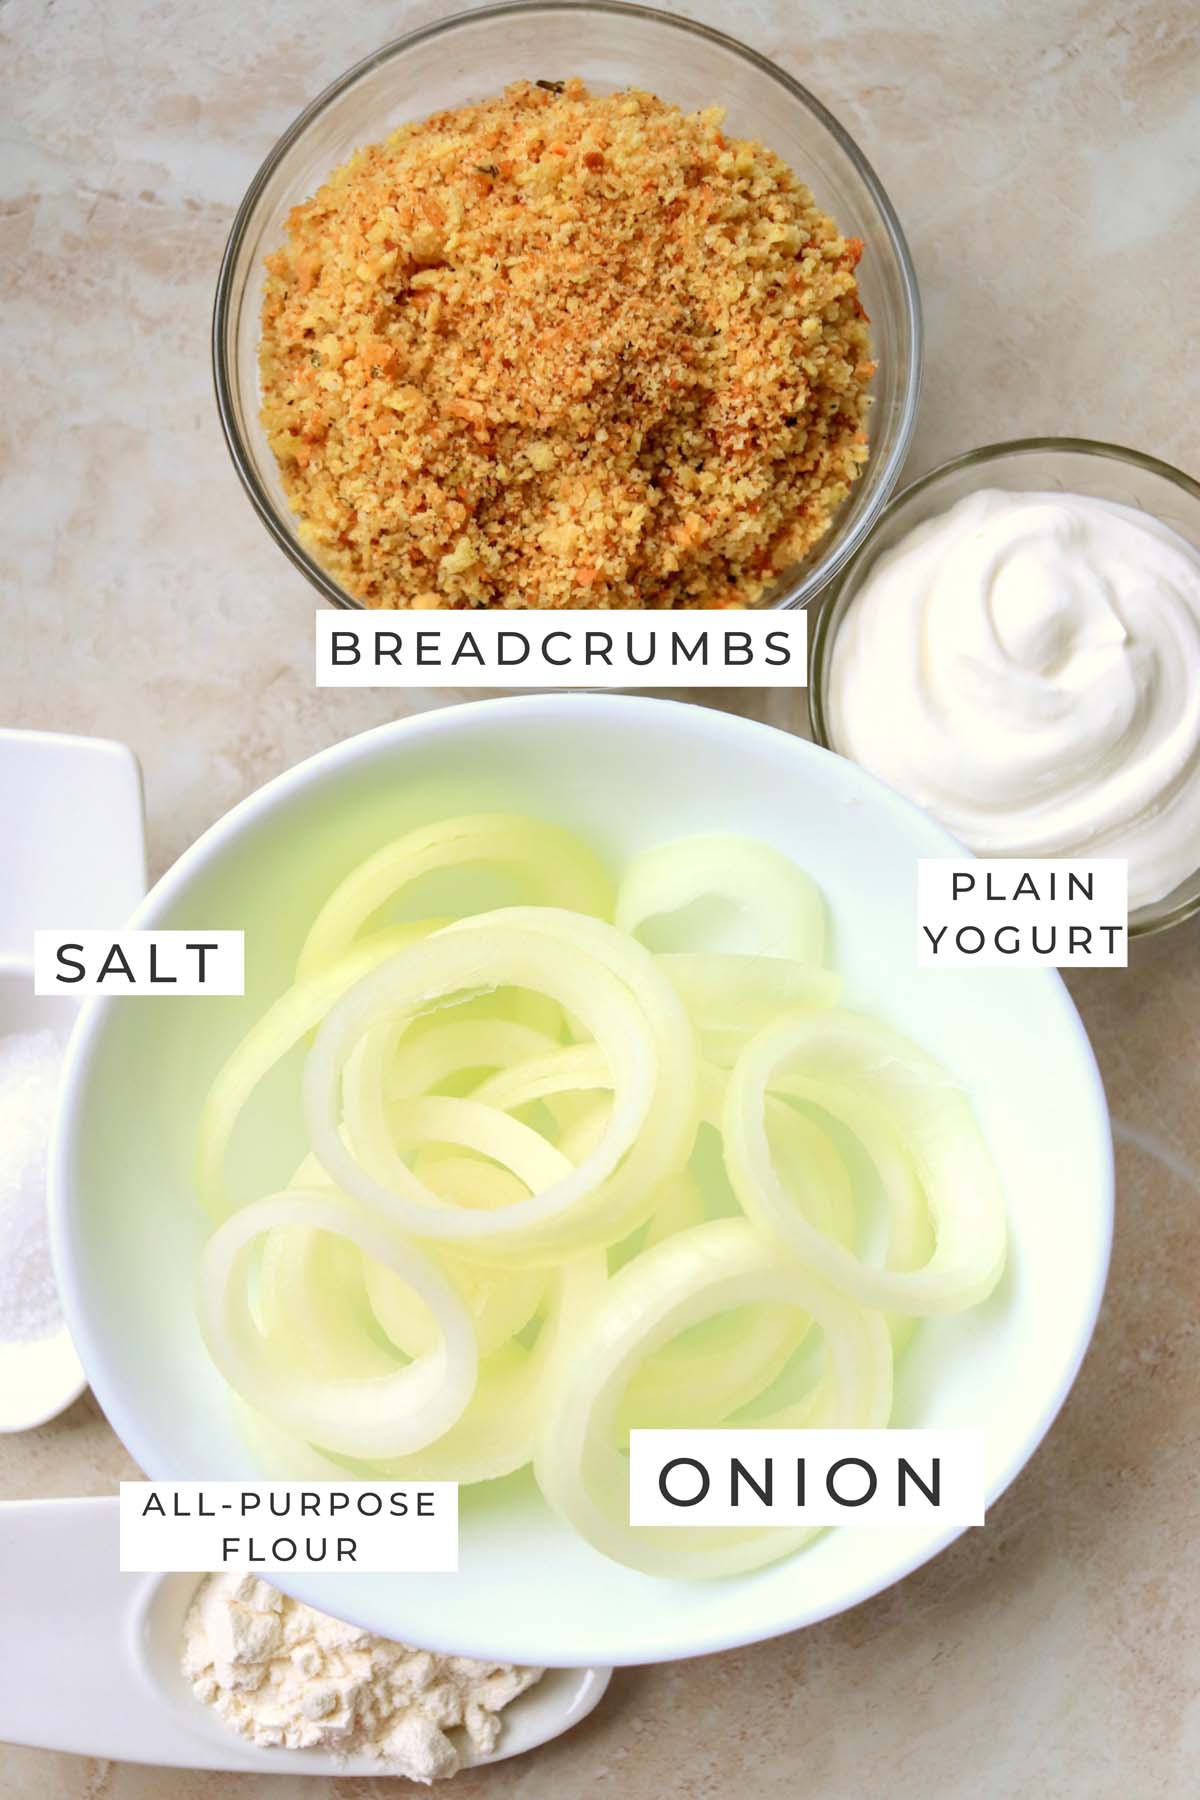 Labeled ingredients for the onion rings.